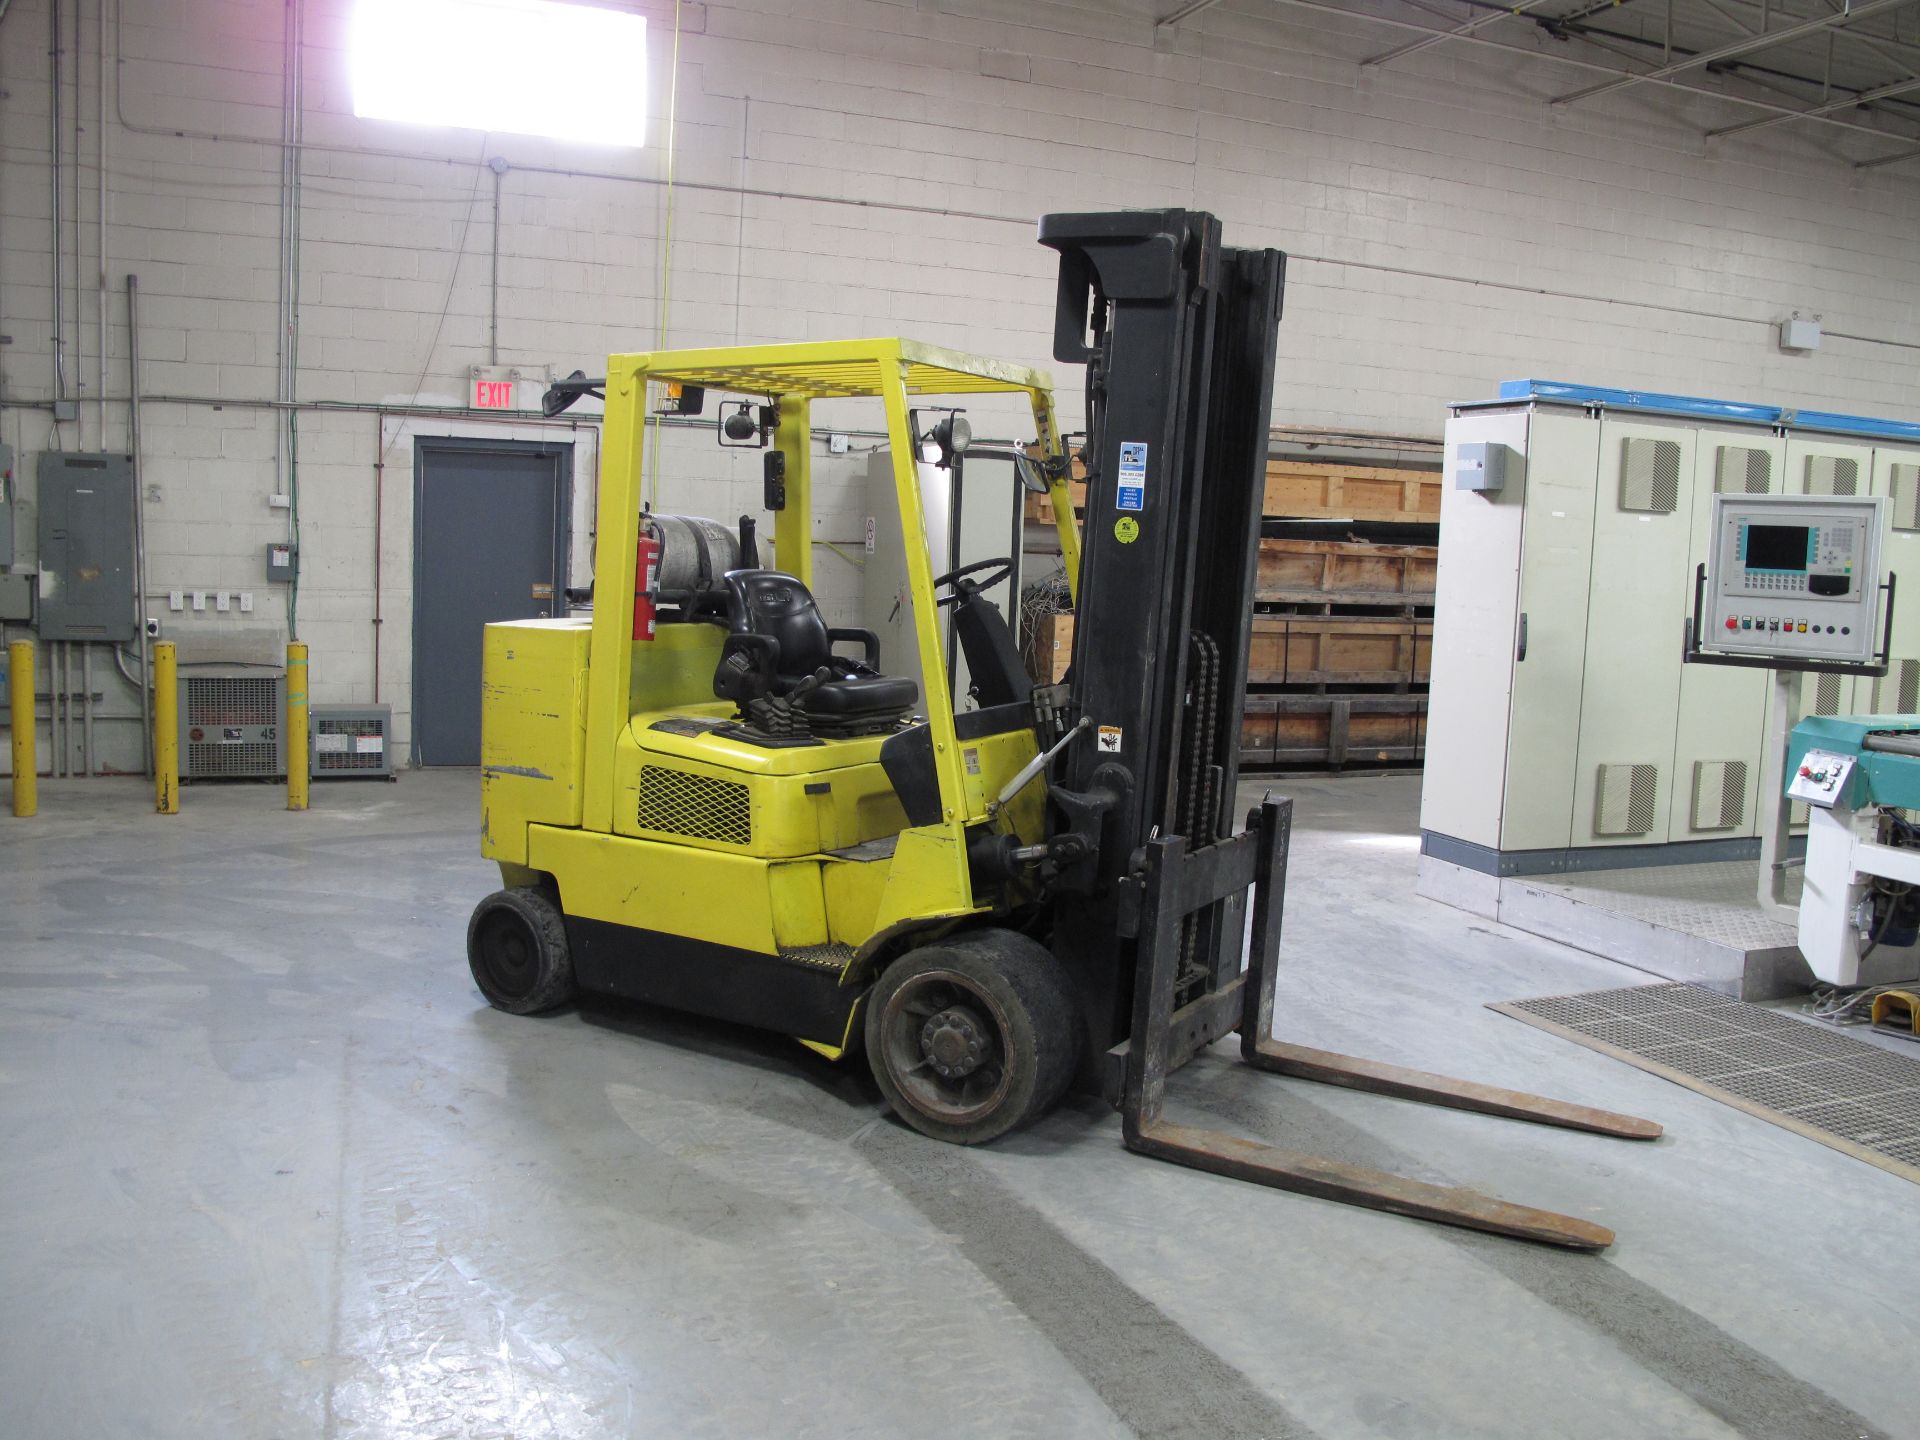 HYSTER, S120XMS-PRS, 12,000 LBS, 3 STAGE, LPG FORKLIFT, 48" FORKS, 208" MAXIMUM LIFT, 9,701 HOURS, - Image 5 of 7